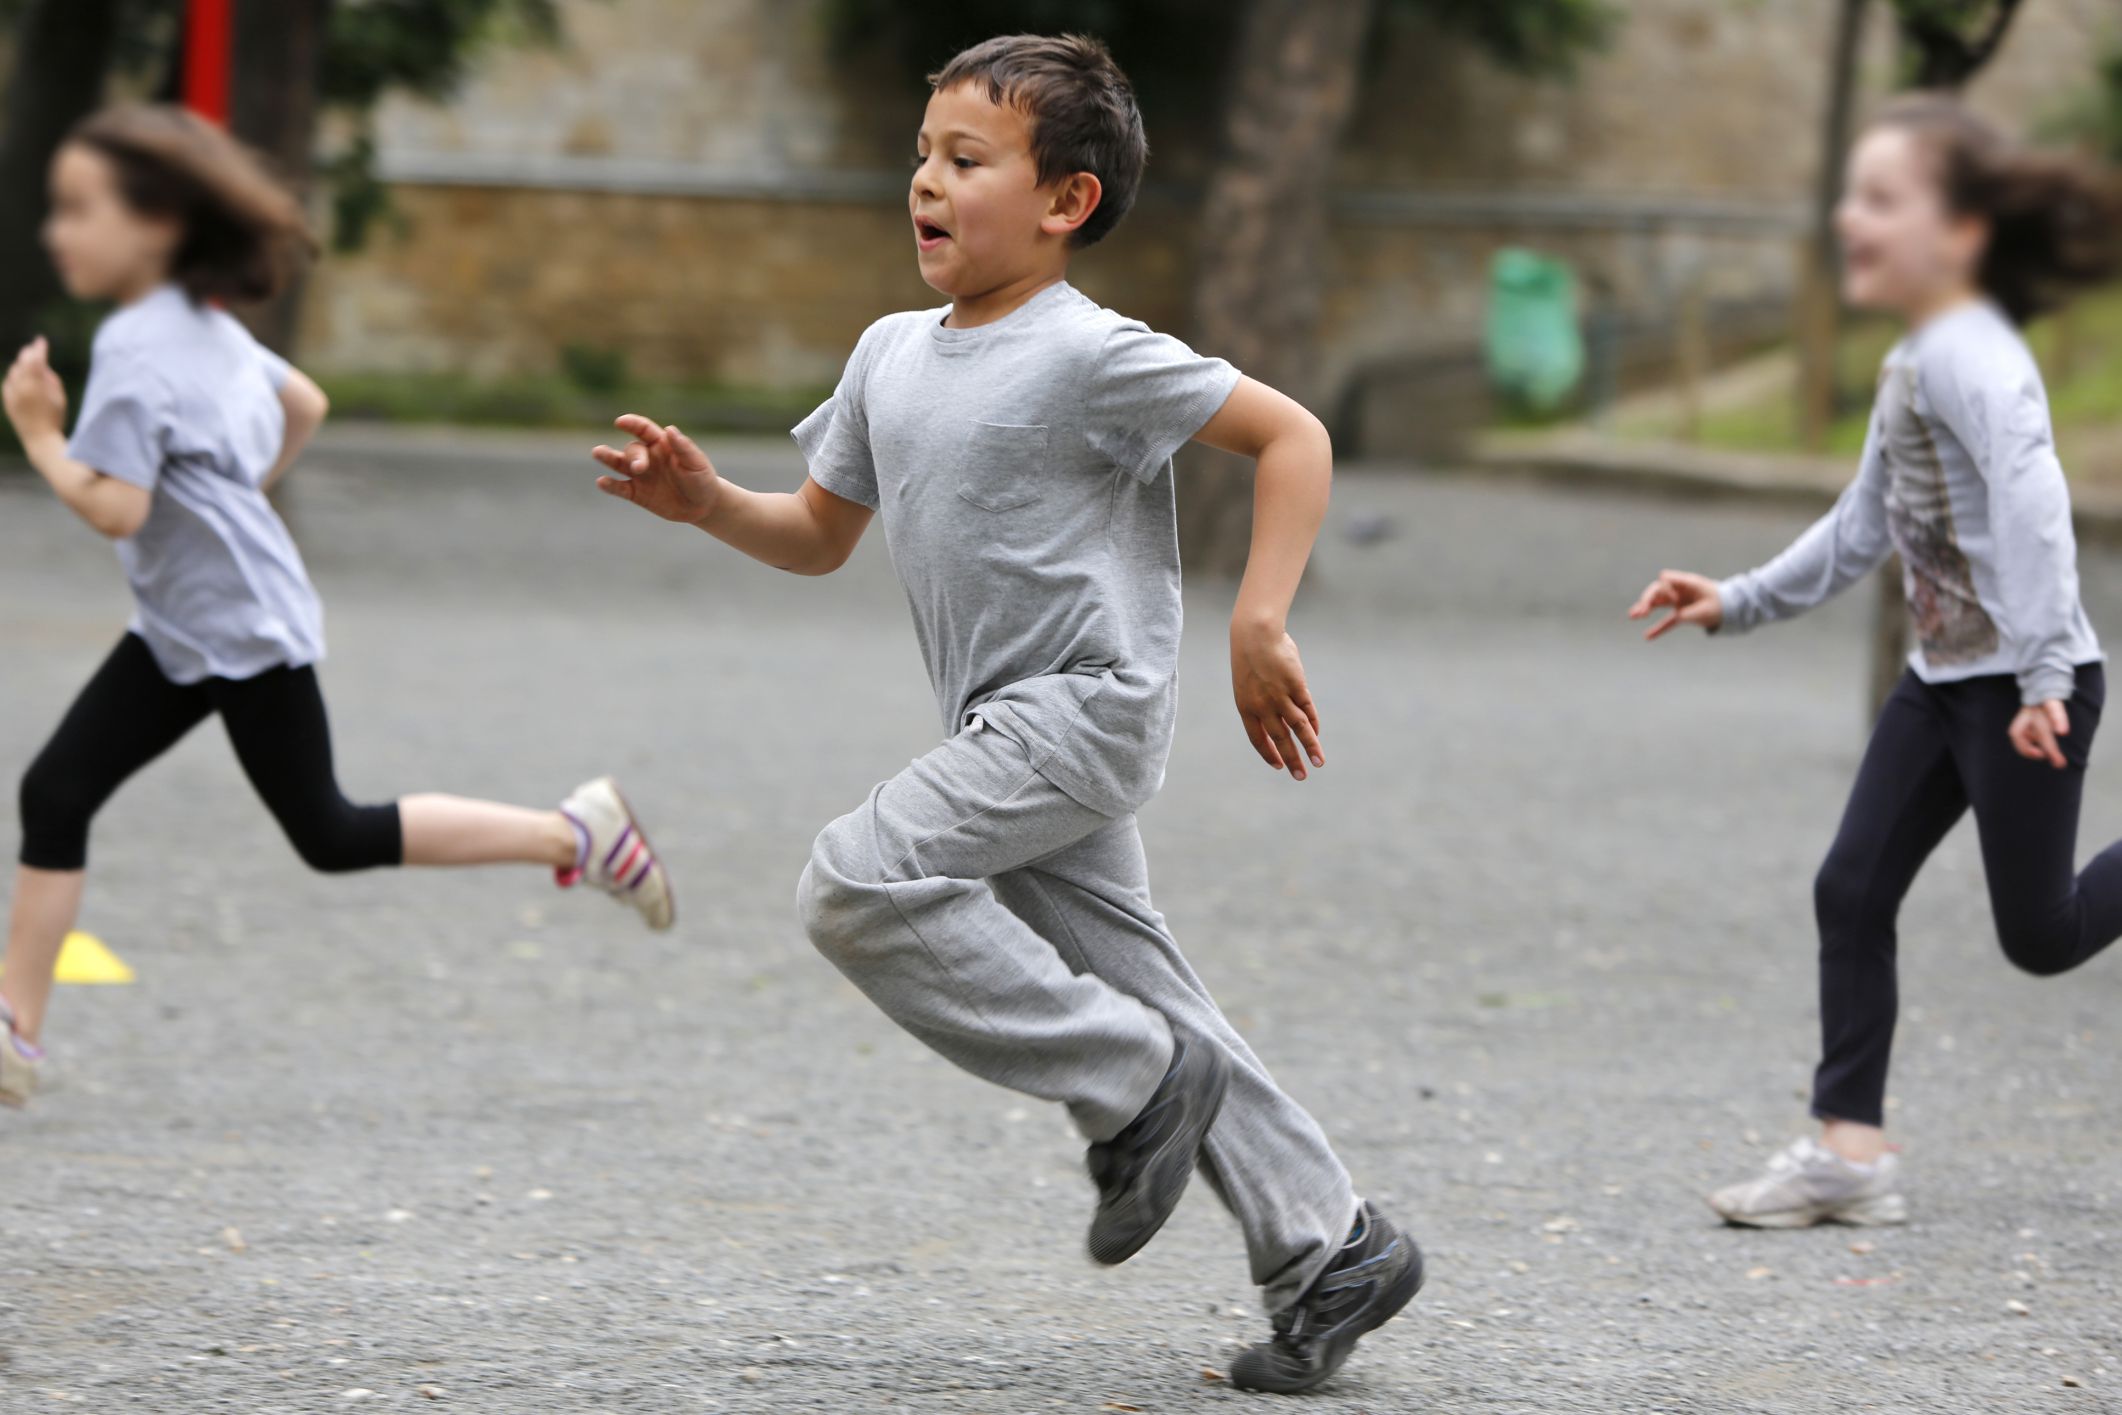 How to Start an After-School Running Club for Kids